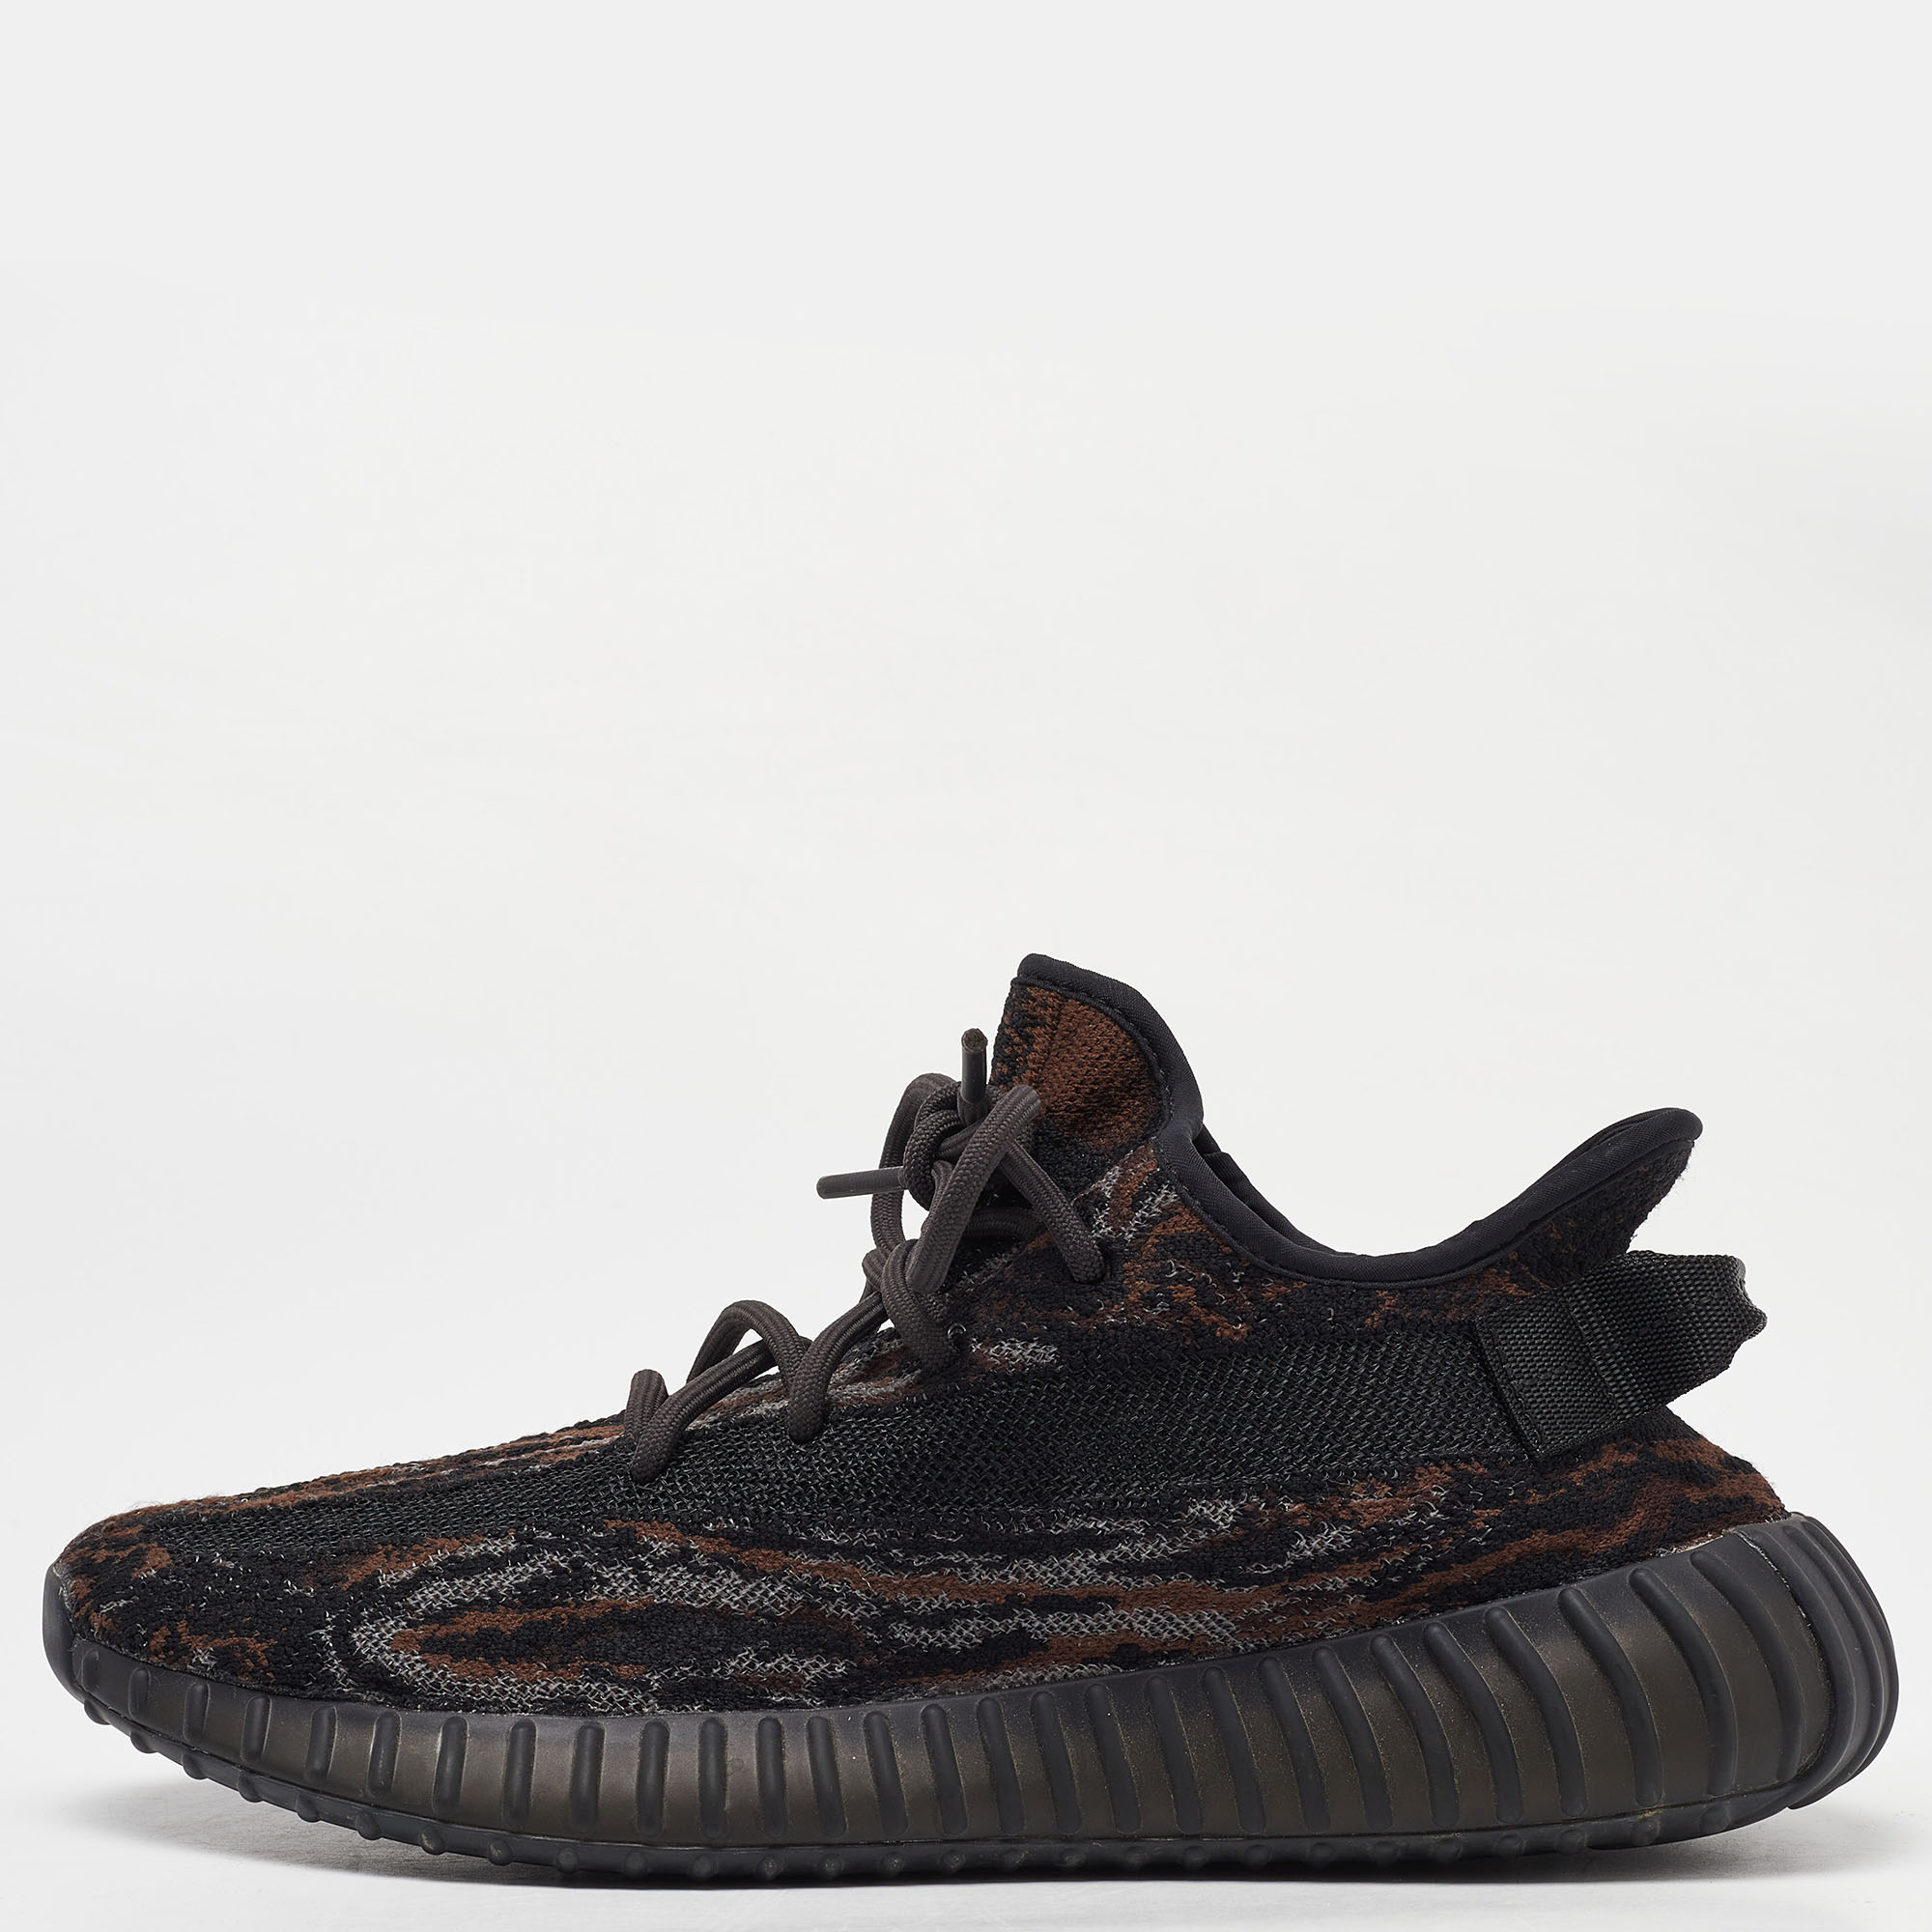 

Yeezy x Adidas Brown/Black Knit Fabric Boost 350 V2 Mx-Oat Sneakers Size 42.5, Multicolor